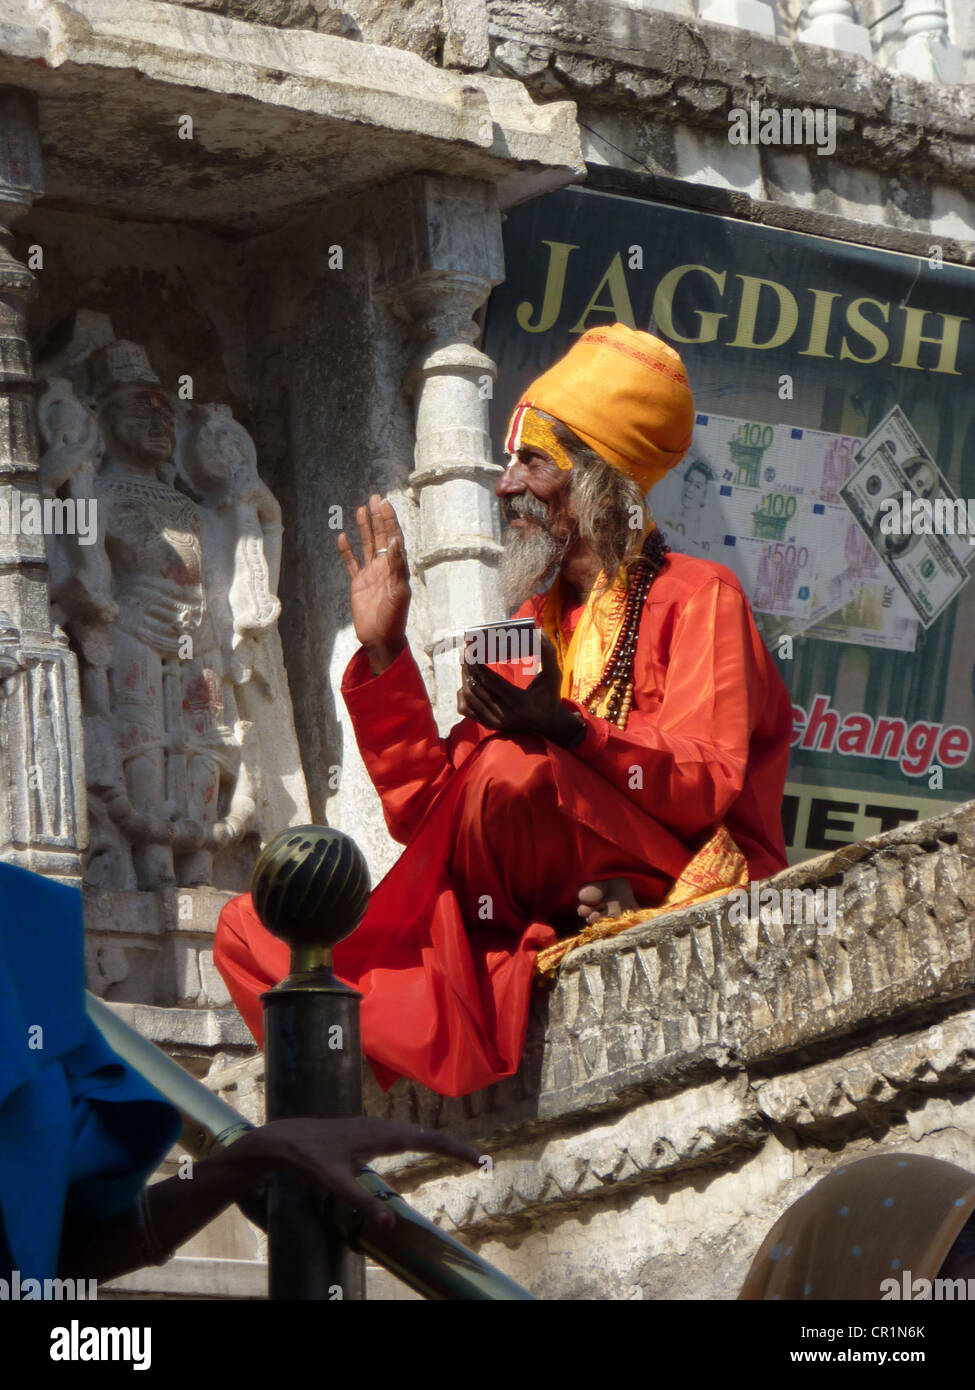 UDAIPUR, INDIA - DEC 2 -Hindu Sadhu gives blessings outside a temple on Dec 2, 2009 in Udaipur, India Stock Photo